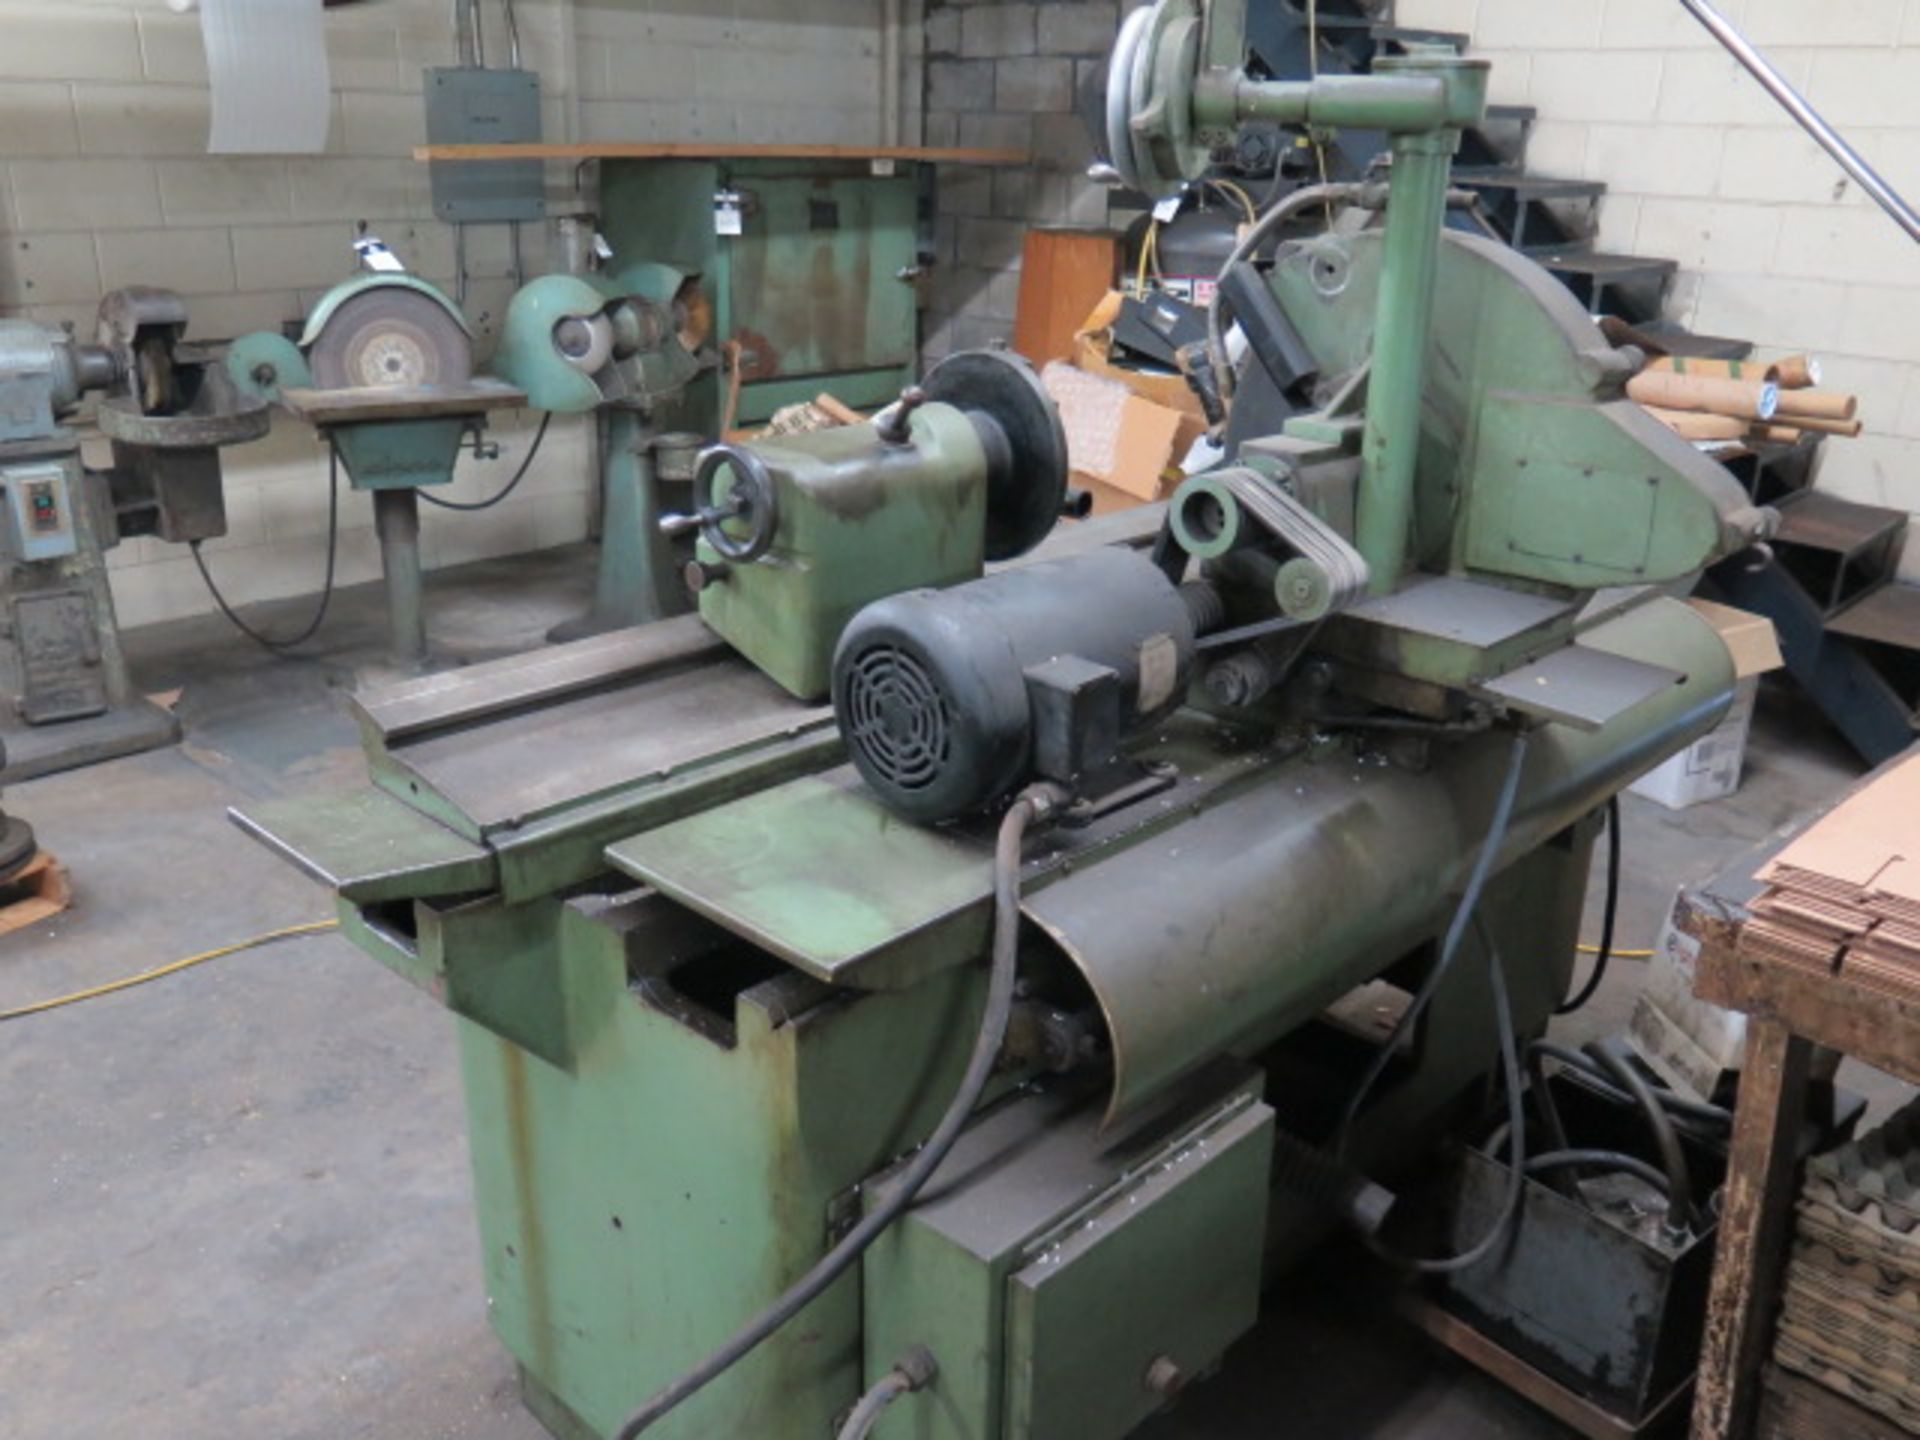 Storm Vulcan mdl. 15 Cam Shaft Grinder s/n 800-76 w/ Motorized Work Head, Tailstock, SOLD AS IS - Image 13 of 16